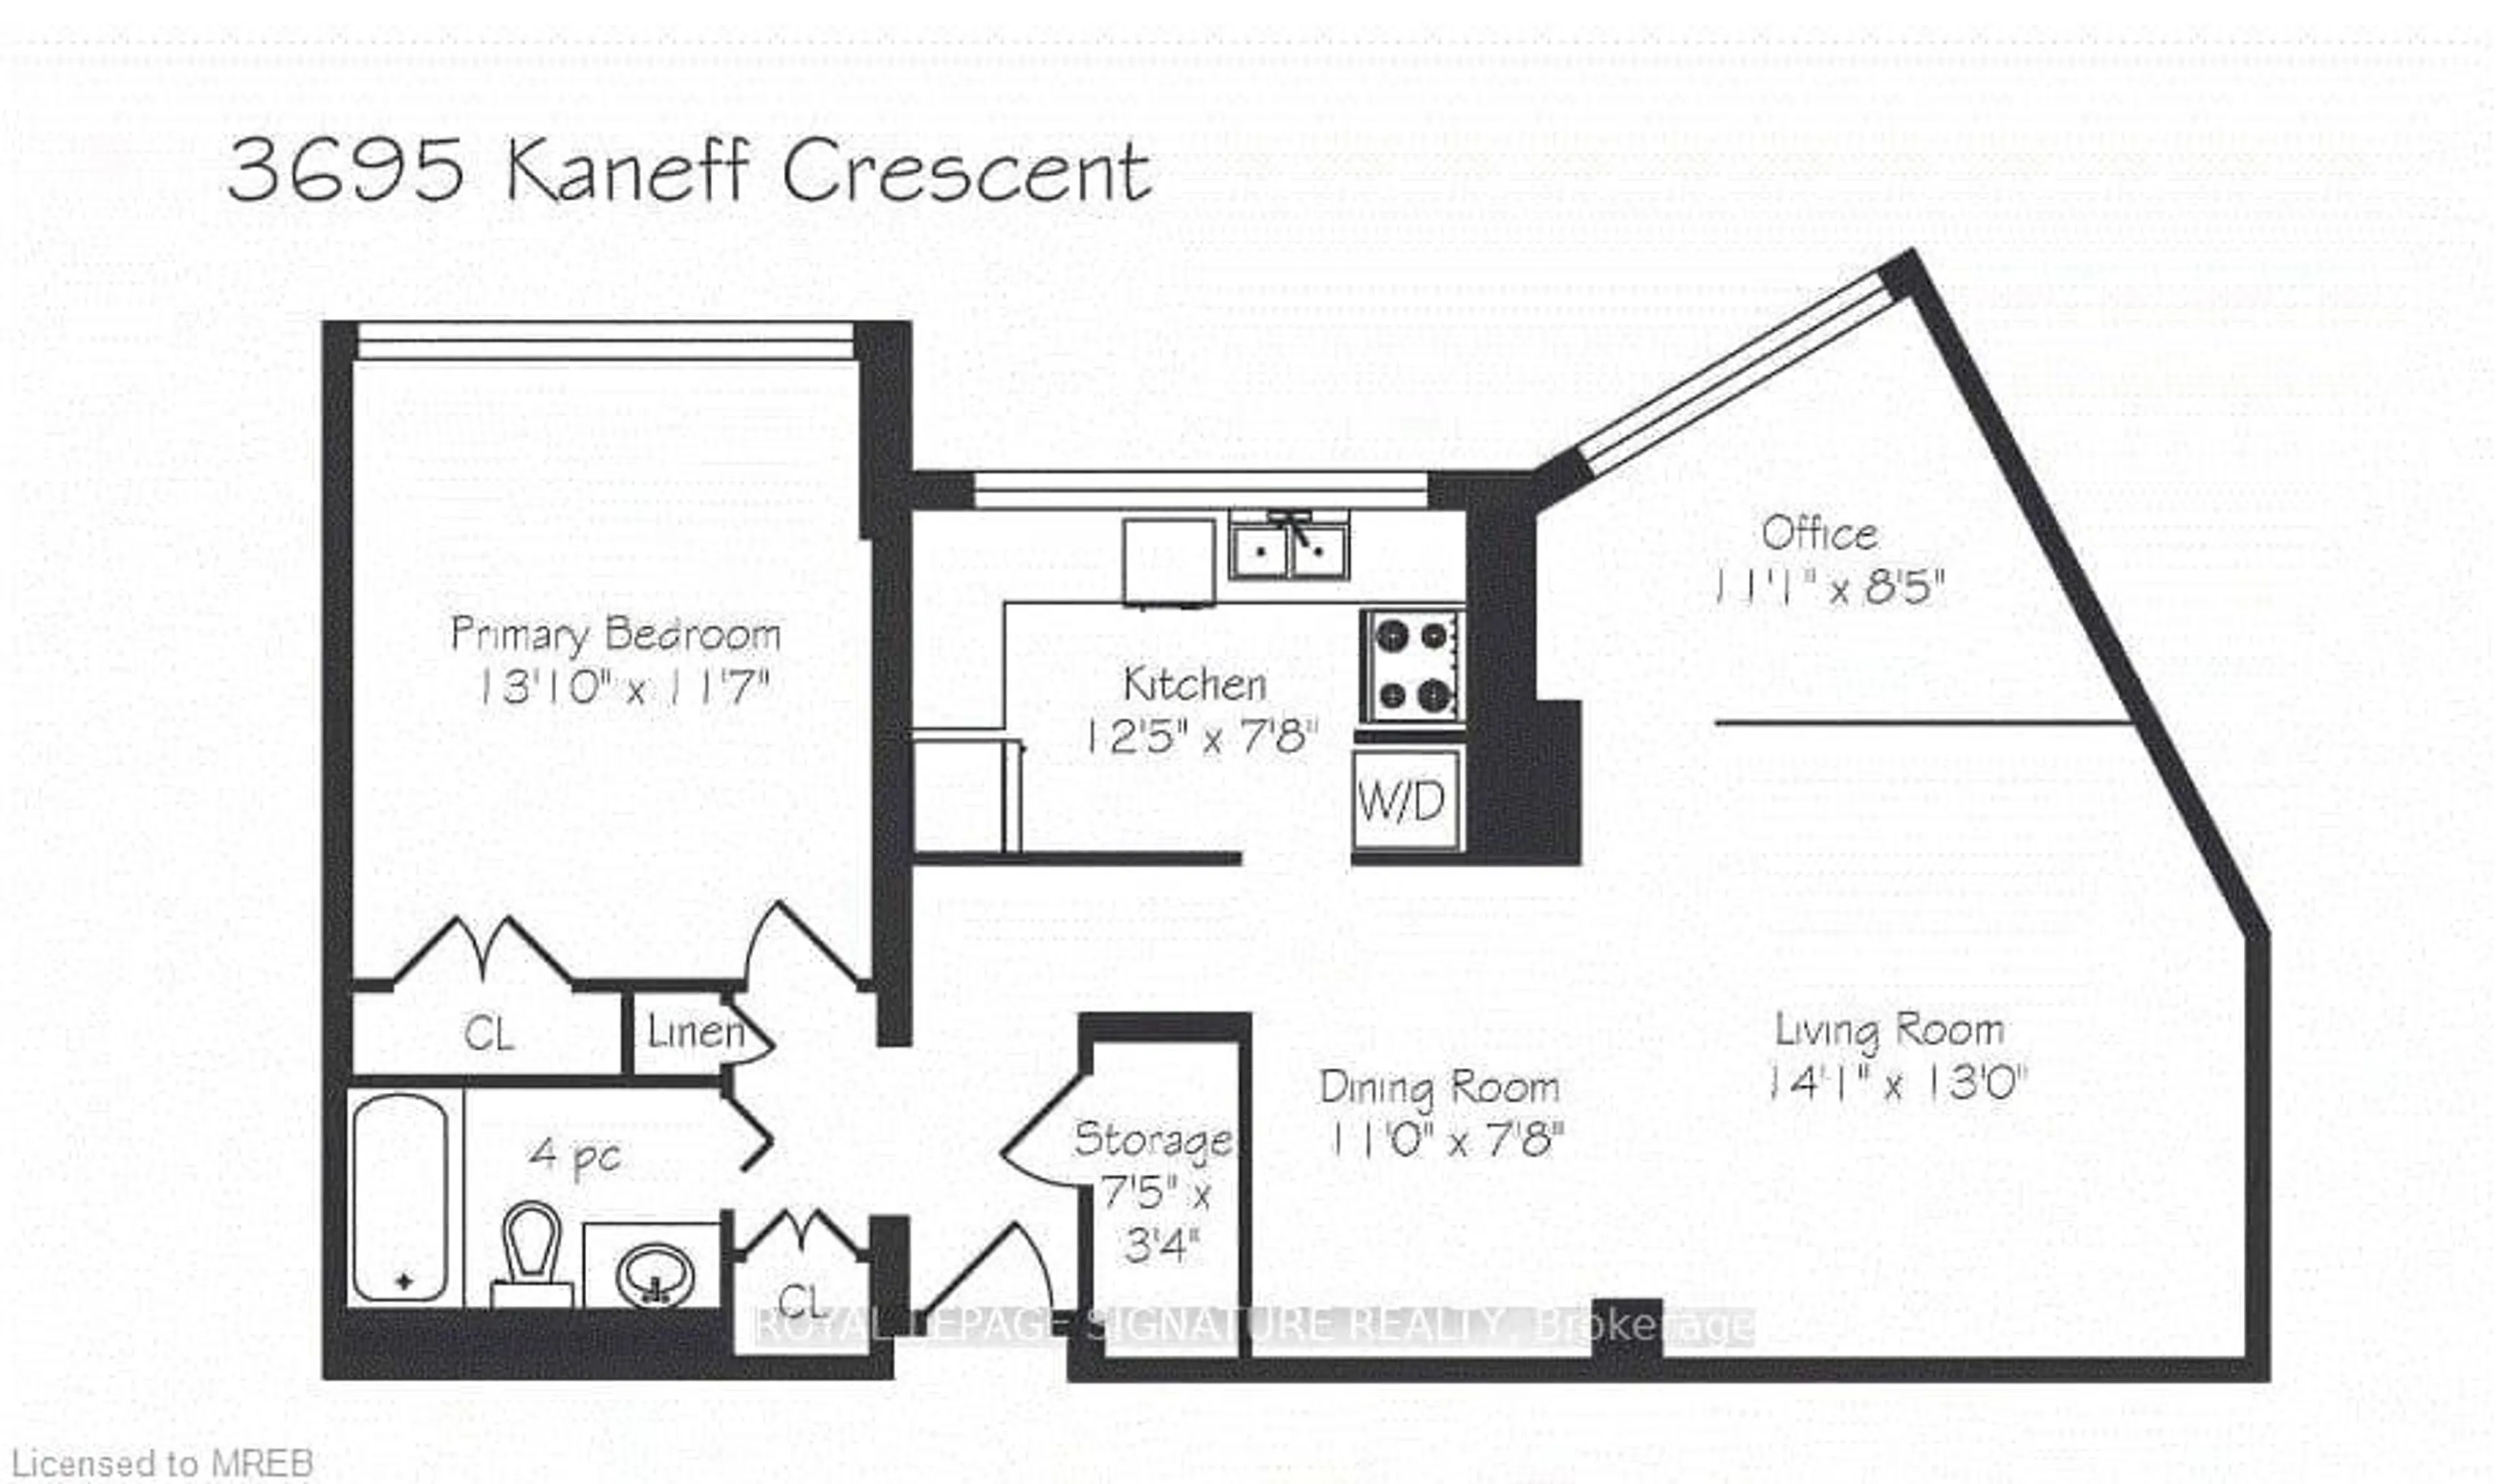 Floor plan for 3695 Kaneff Cres #1510, Mississauga Ontario L5A 4B6